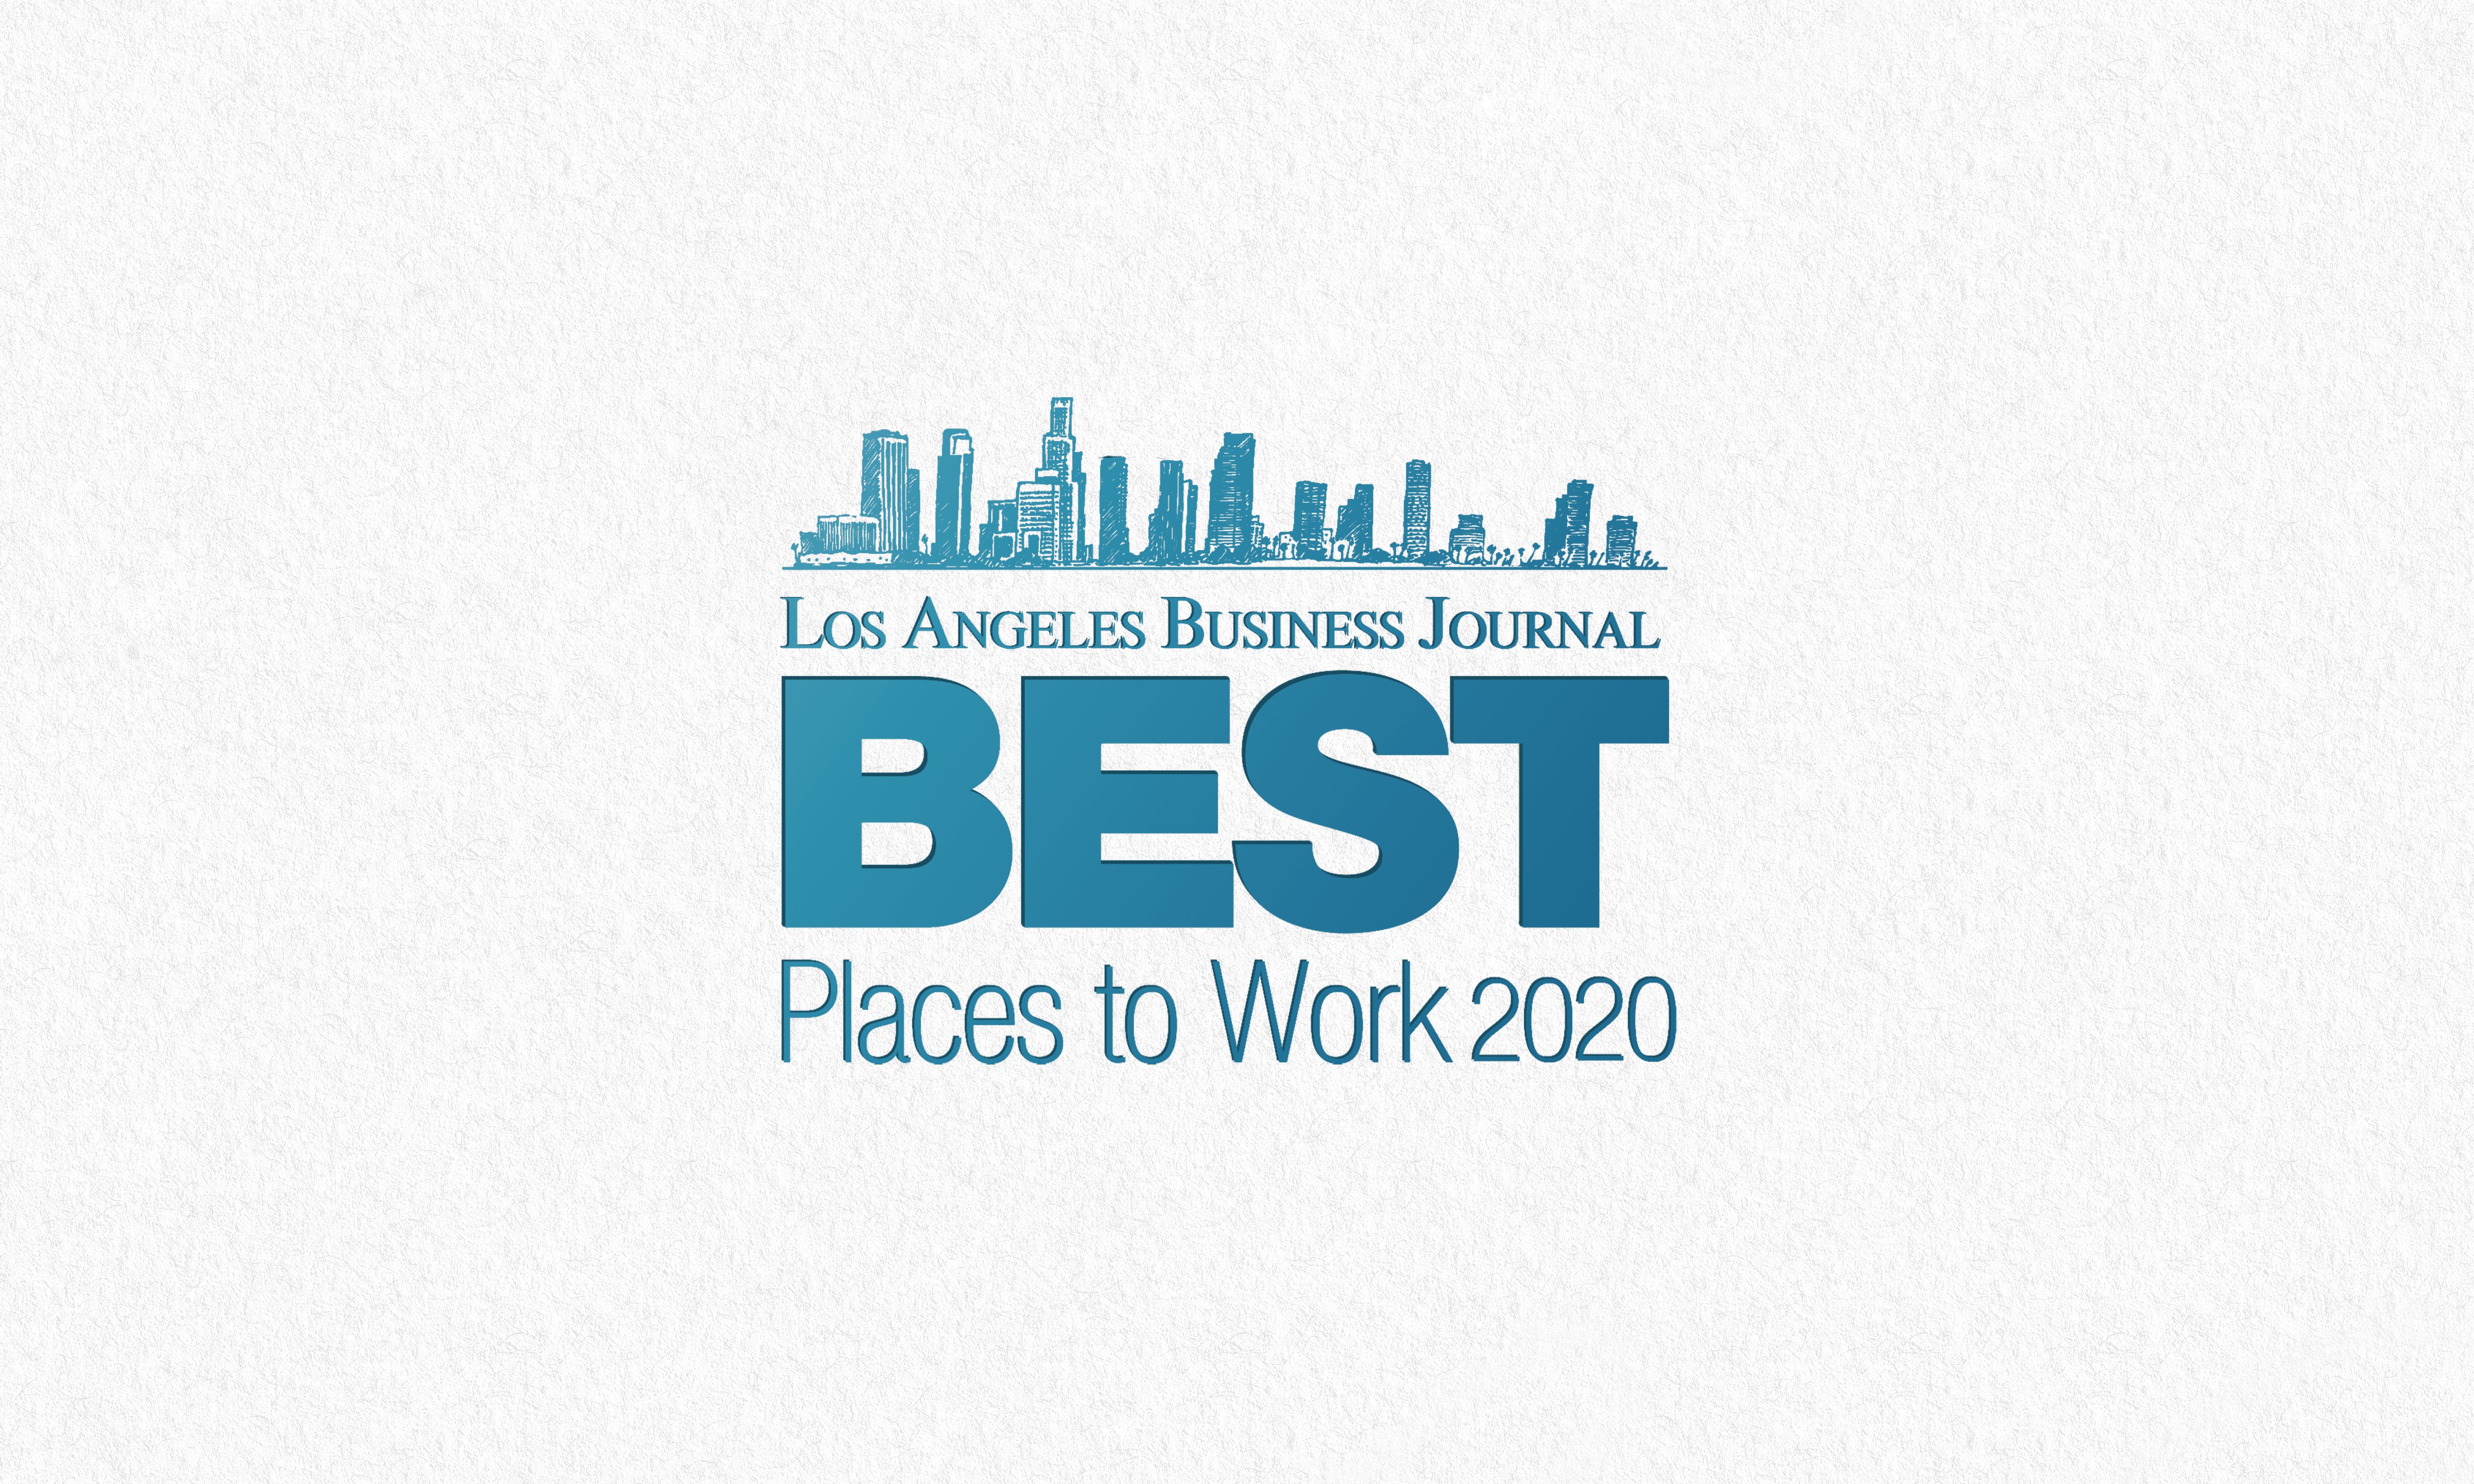 Los Angeles Business Journal Best Places to Work in Los Angeles 2020